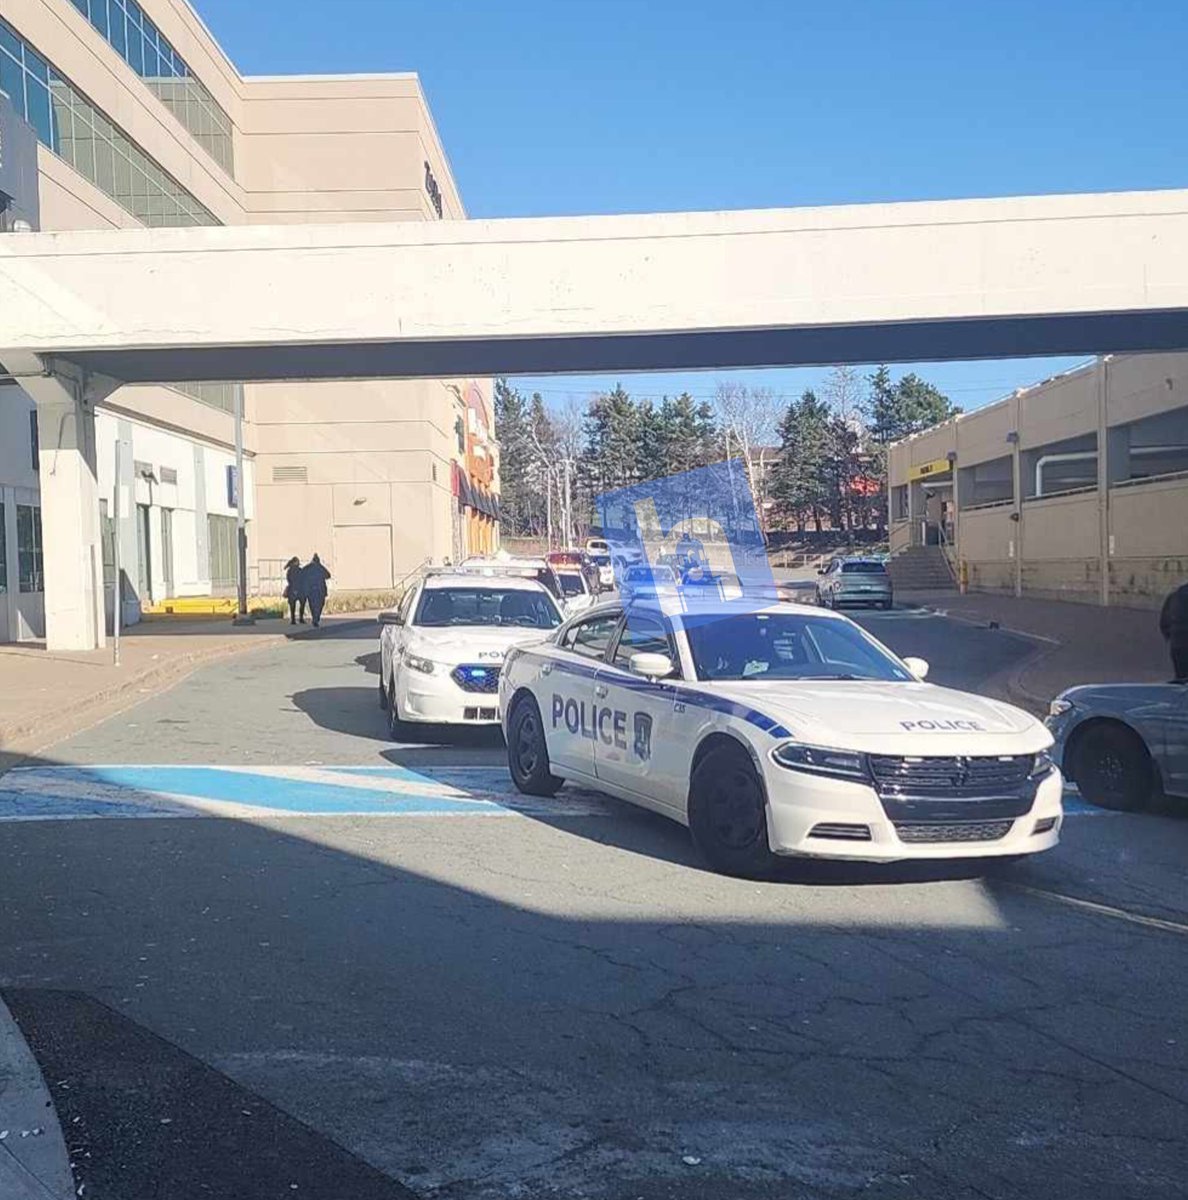 Multiple reports of an ongoing incident at Halifax Shopping Center, parts of parkade complex are taped off. We'll keep you posted (📸 Osama)